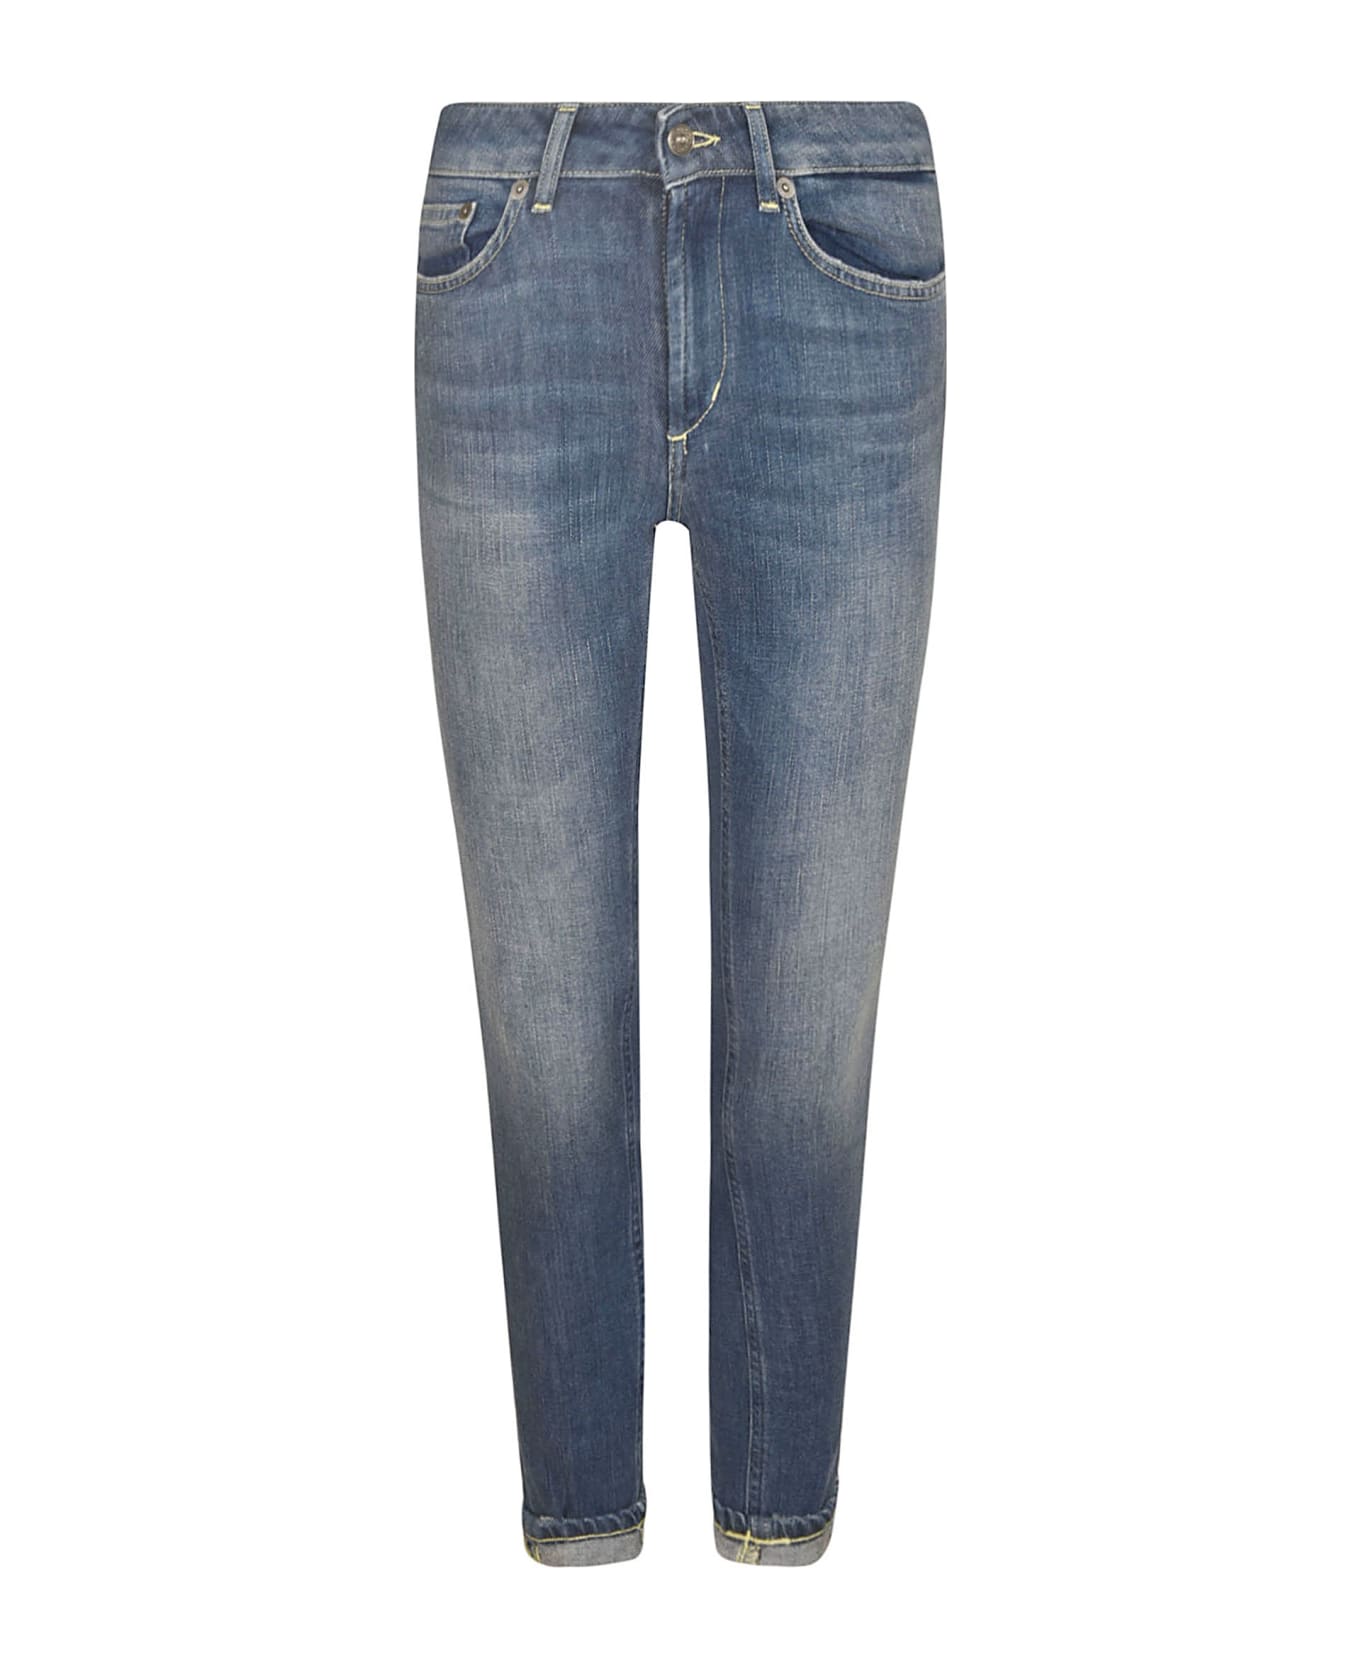 Dondup Skinny Fit Buttoned Jeans - Blue デニム